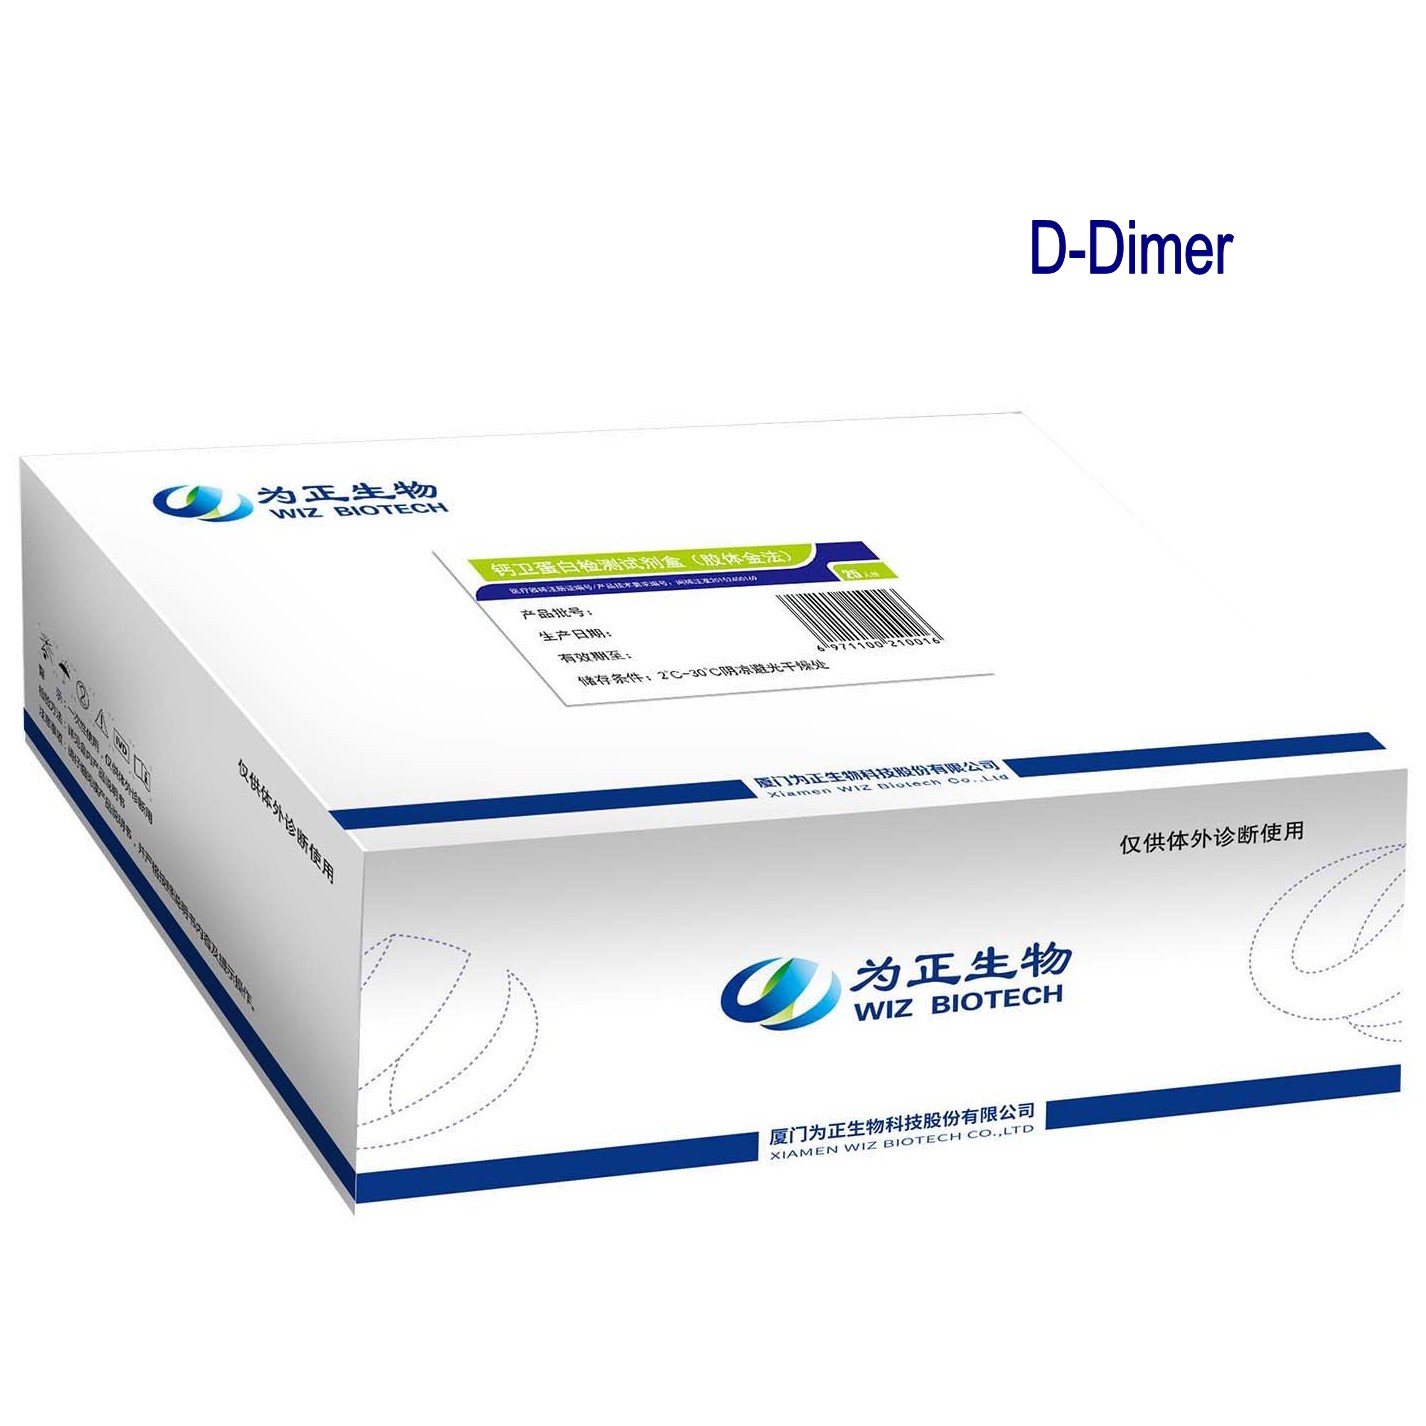 2017 Good Quality Lab Equipment/uncut Sheet/high Quality / Best Price - Diagnostic Kit for D-Dimer (fluorescence immunochromatographic assay) – Baysen